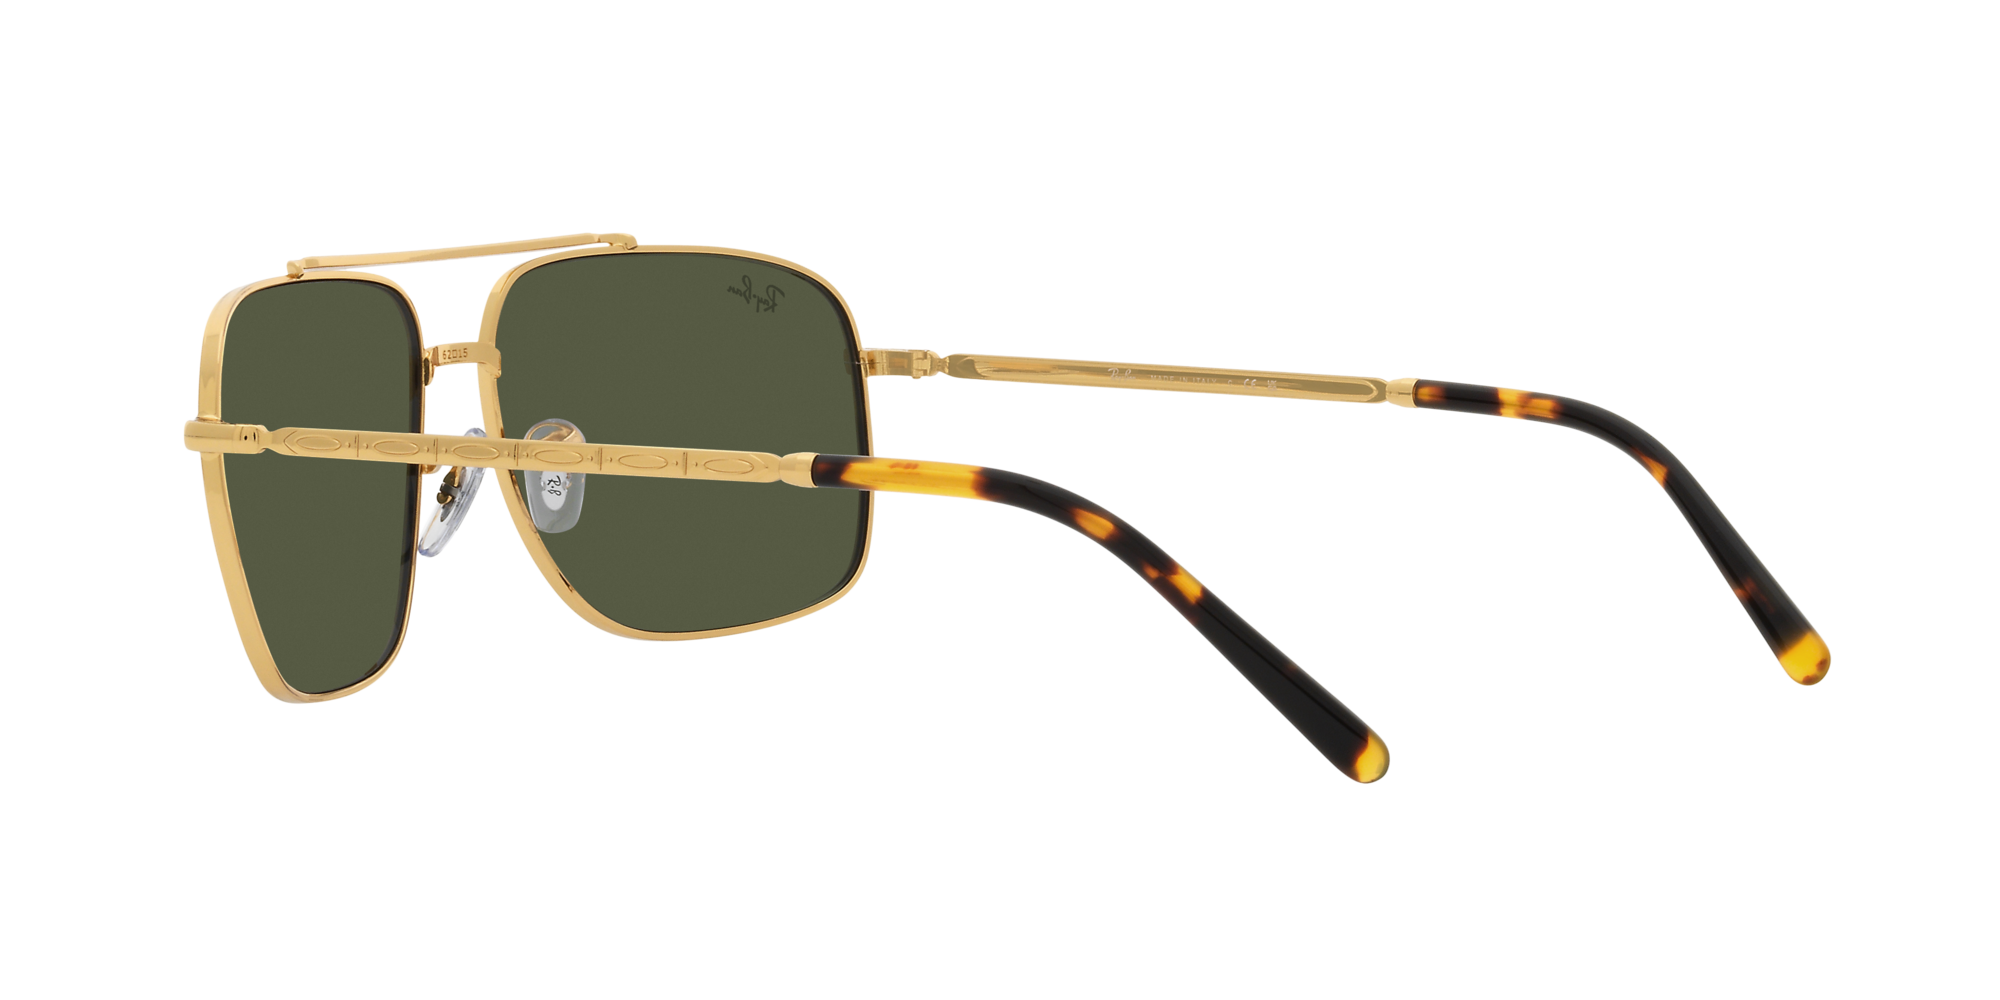 Ray Ban Unisex Sonnenbrille in Gold RB3796 919631 59